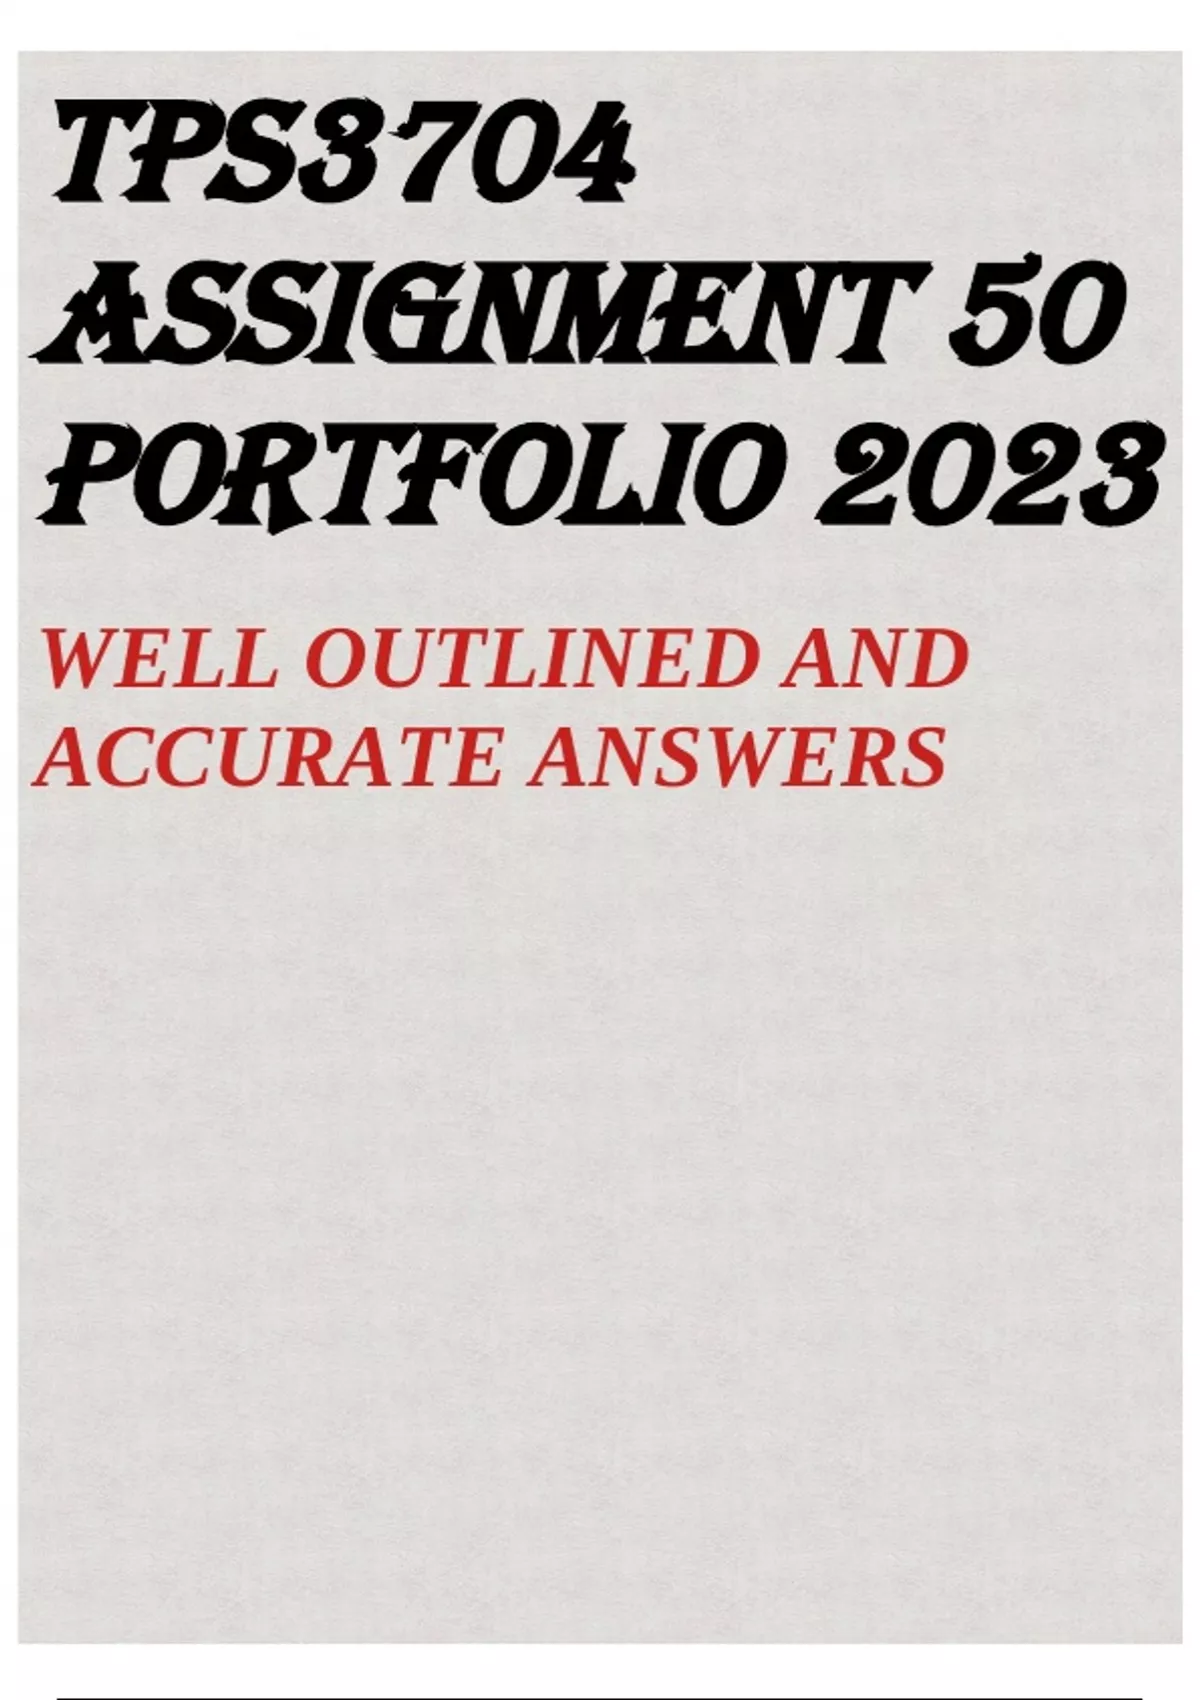 tps3704 assignment 50 answers 2020